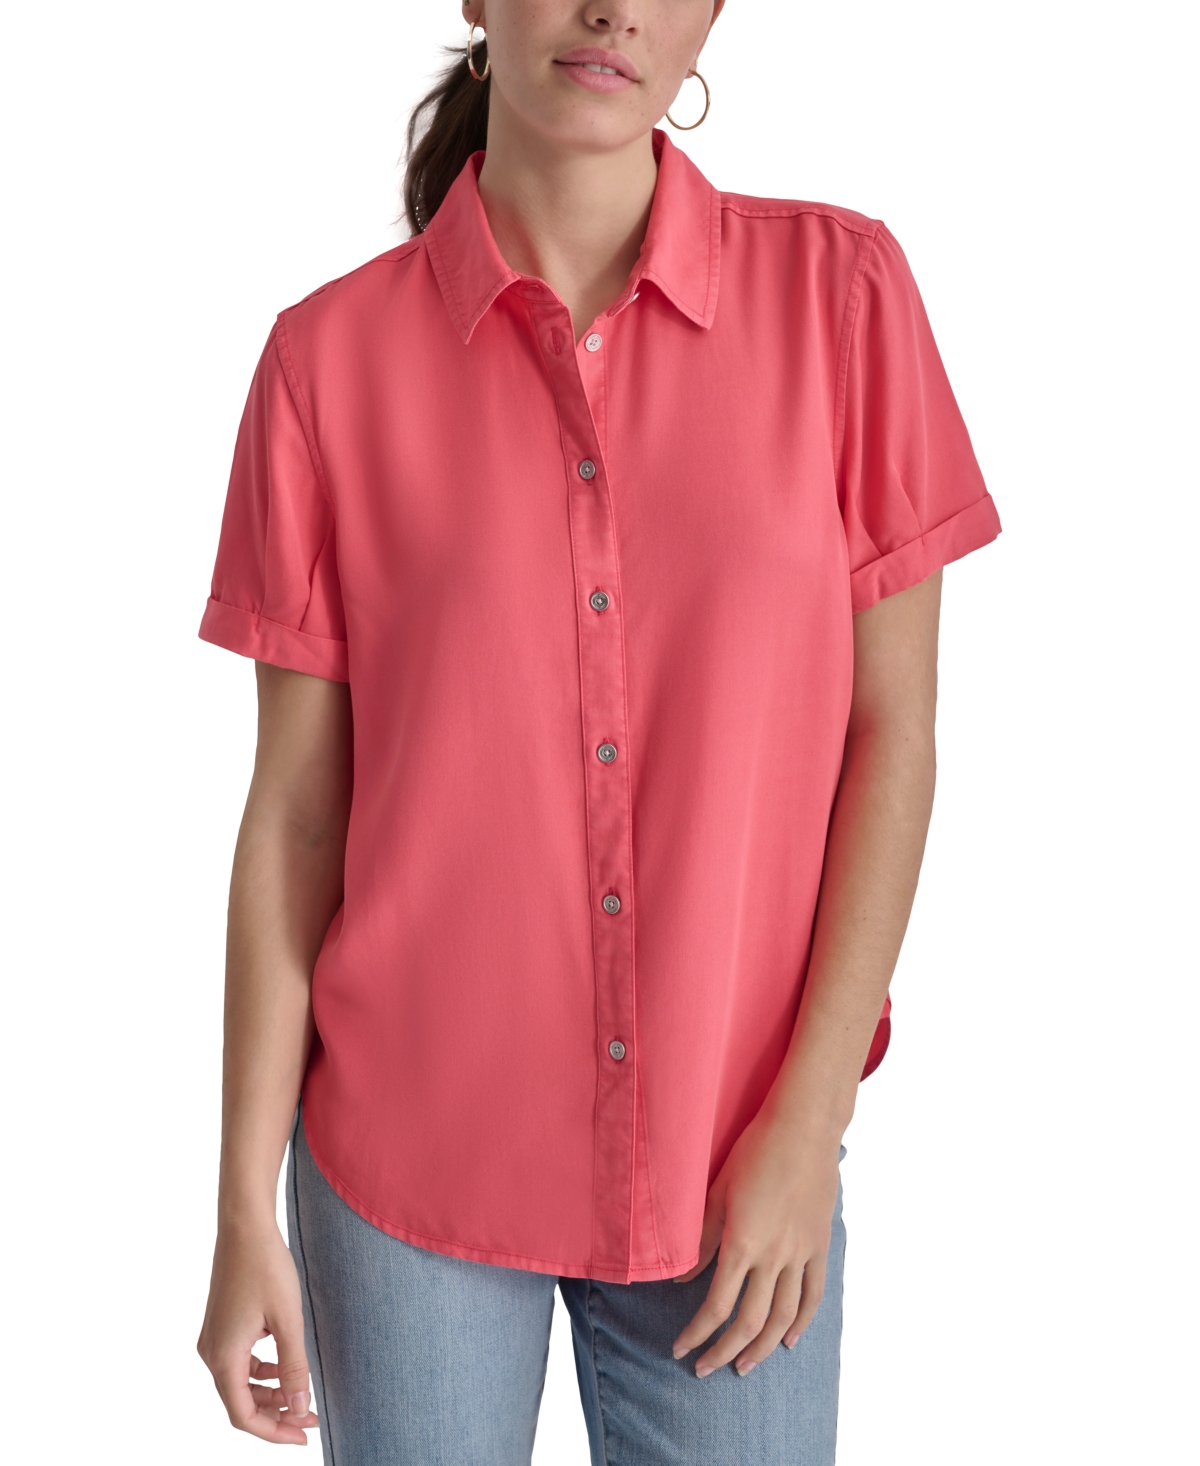 Women's Rolled-Sleeve Button-Up Shirt - Chambray